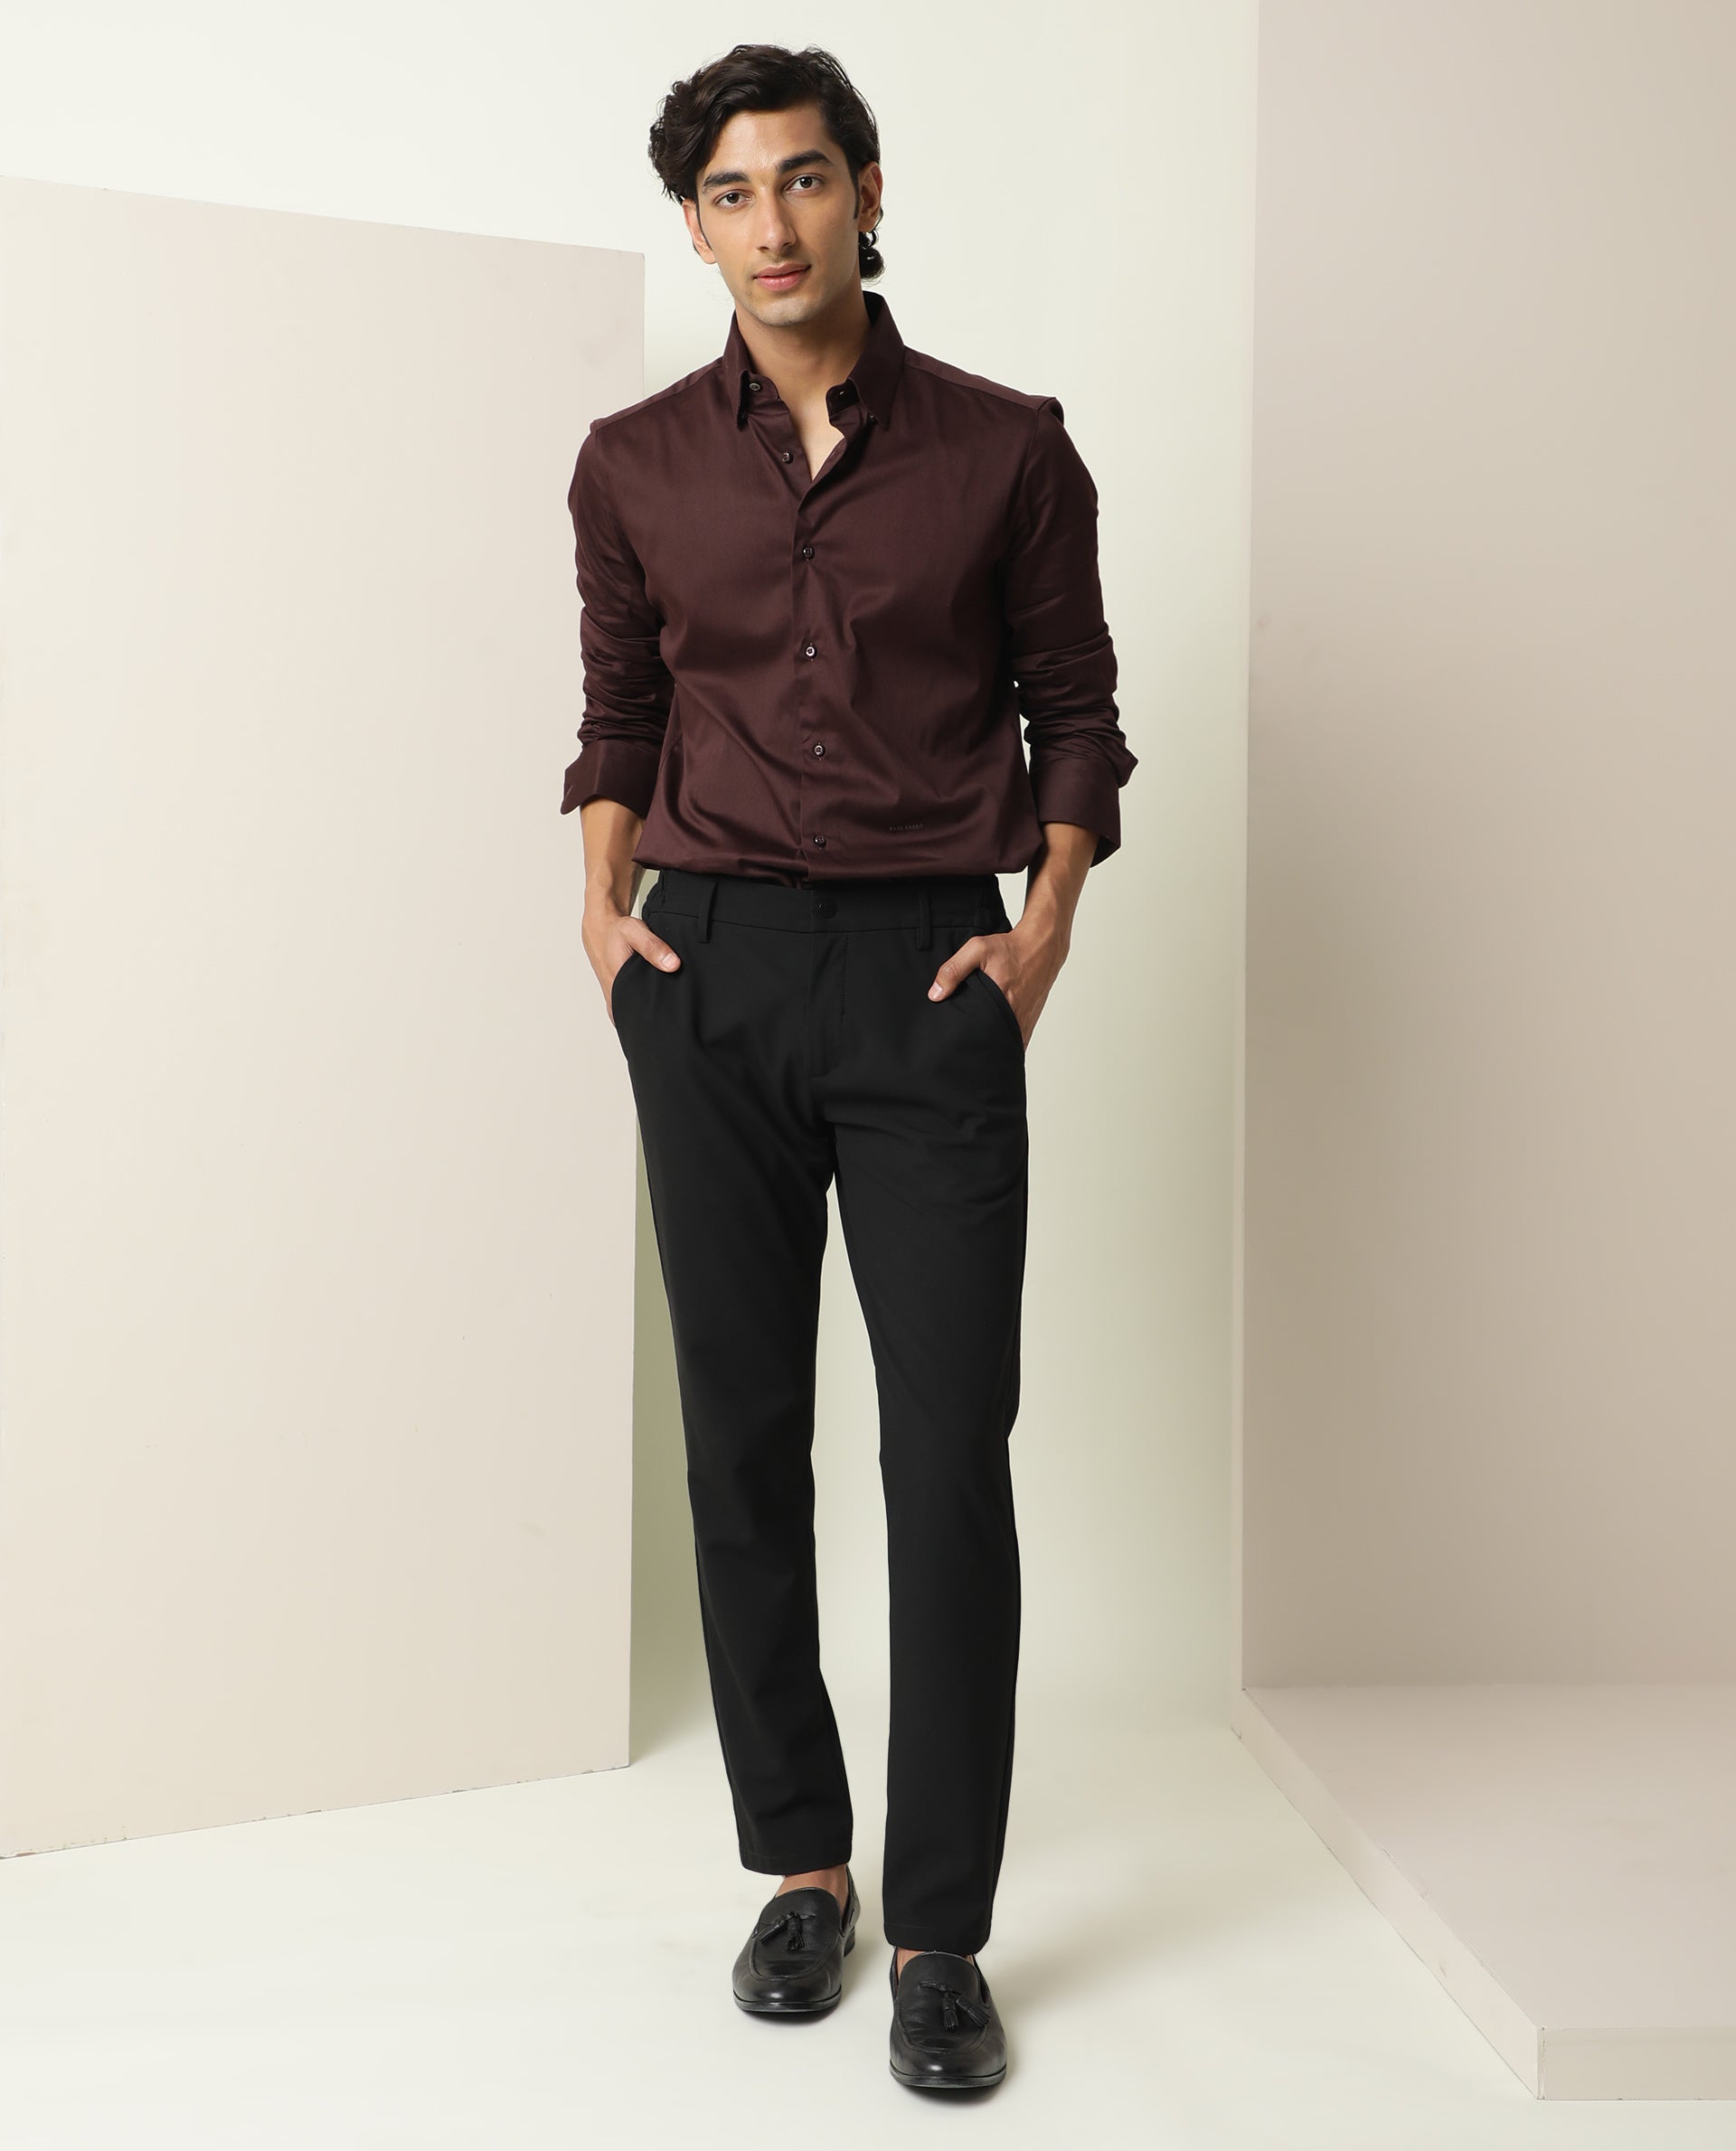 What Color Shirt Goes With Maroon Pants? (Pics) • Ready Sleek